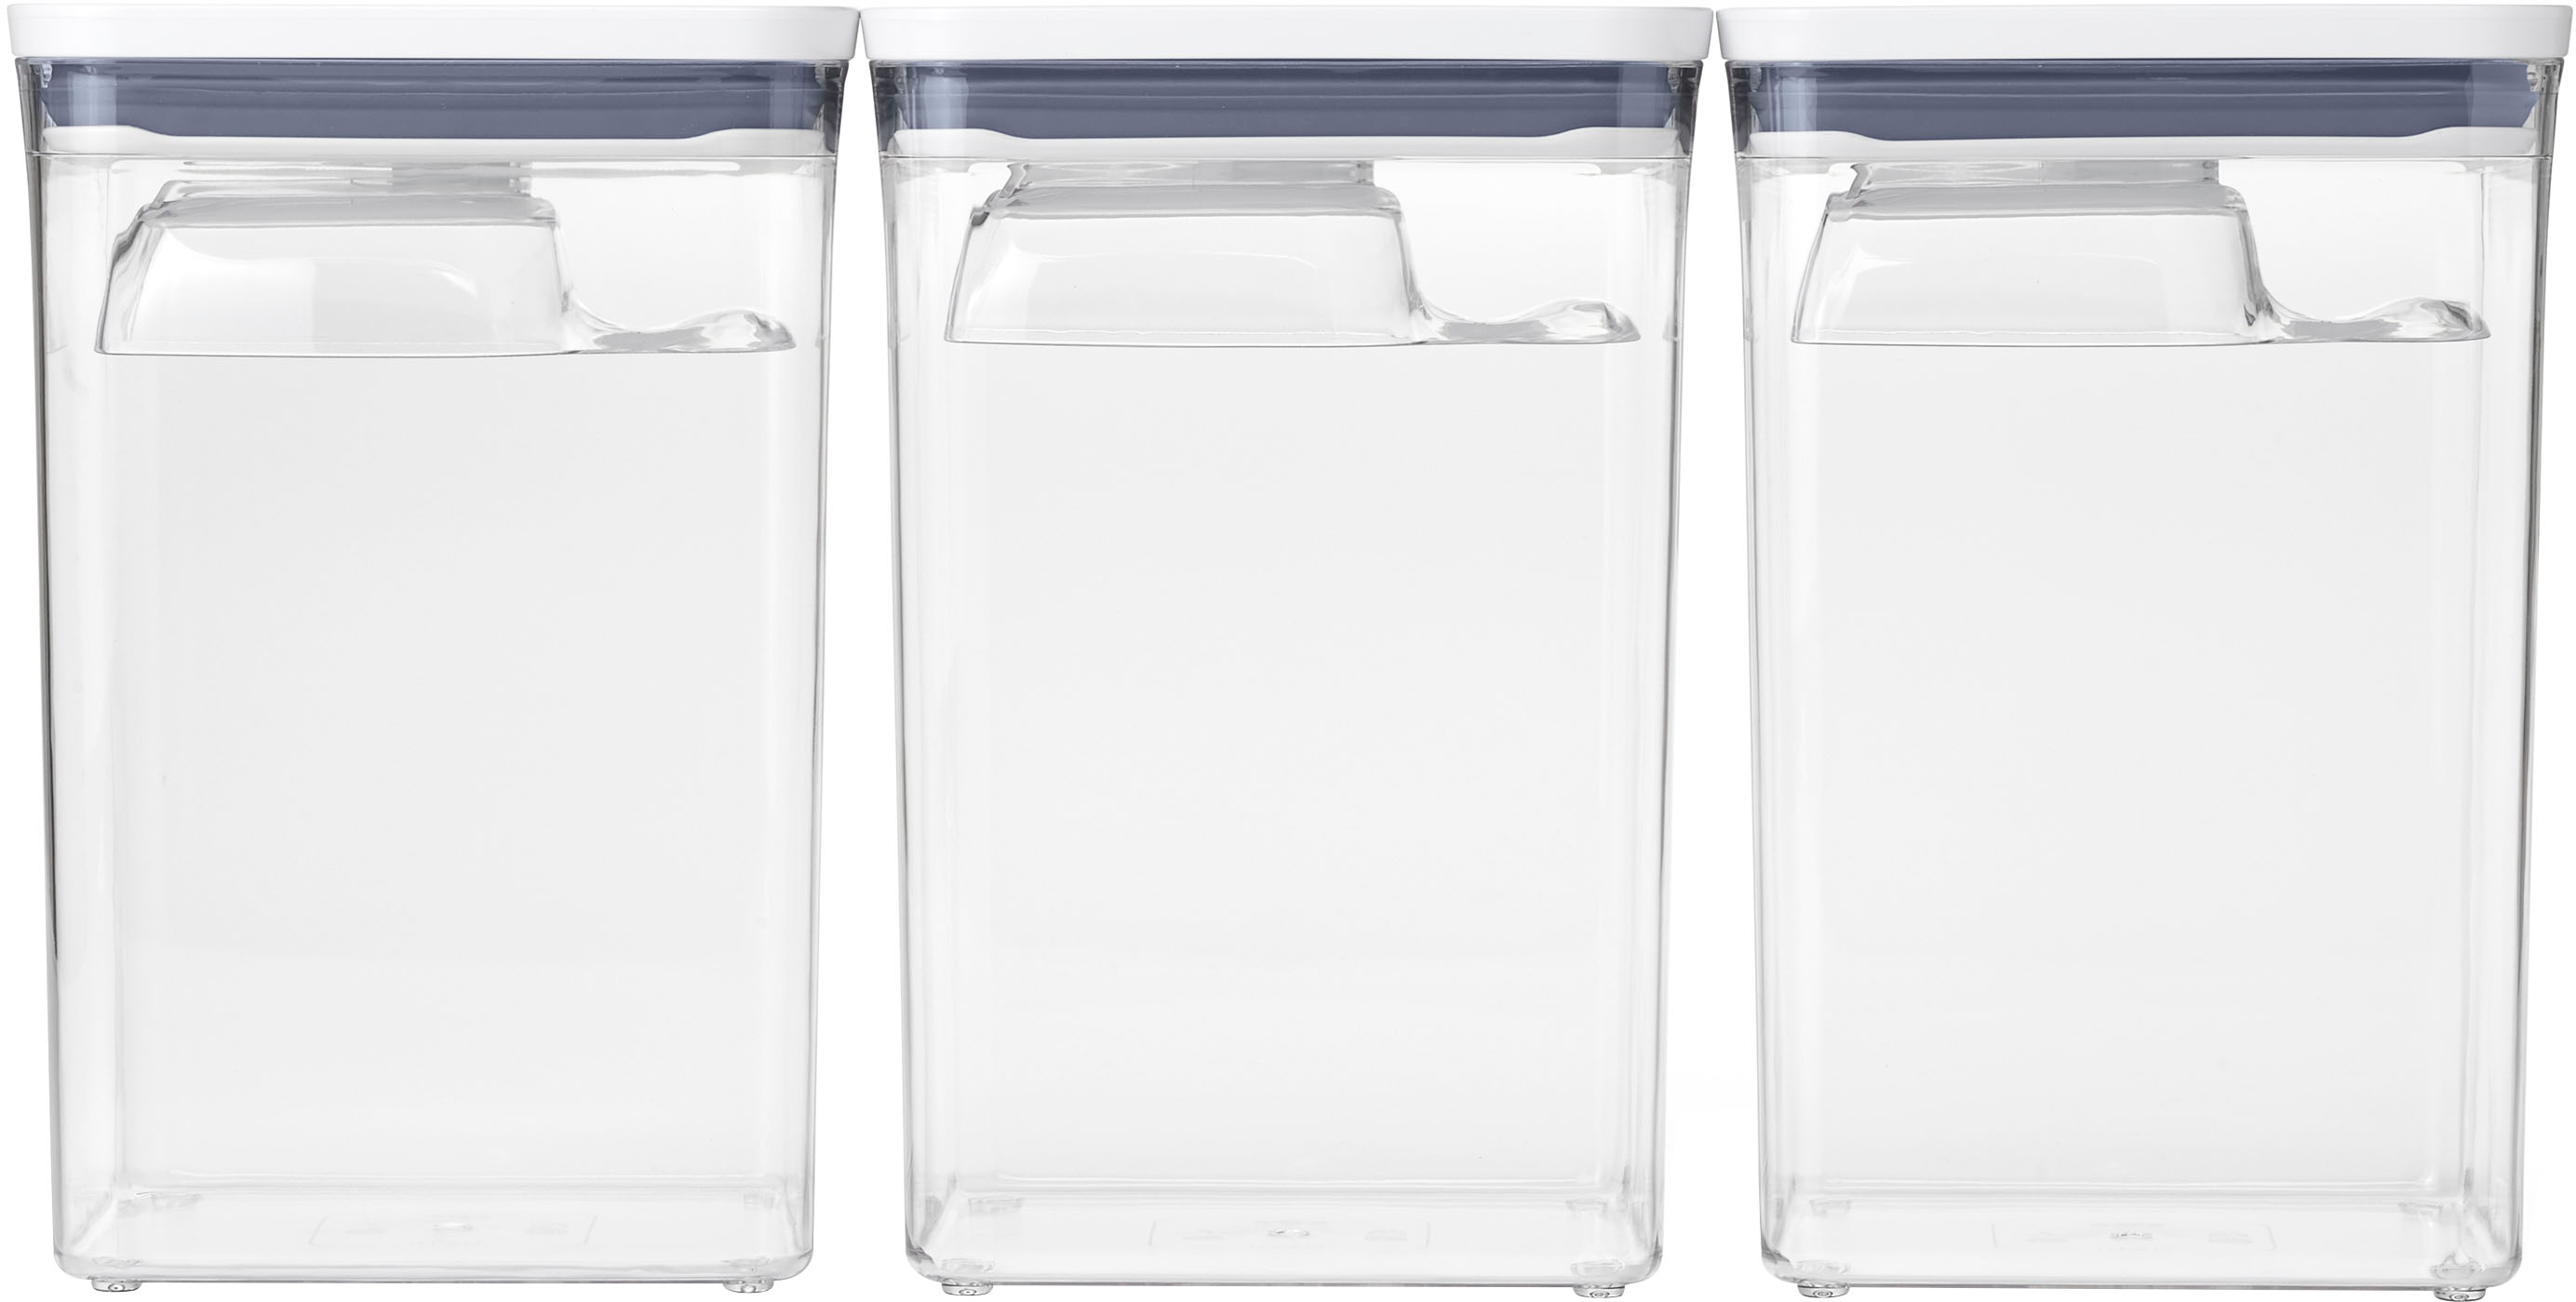 OXO Good Grips 0.2 qt. Mini POP Container with Airtight Lid (4-Pack)  11236100 - The Home Depot